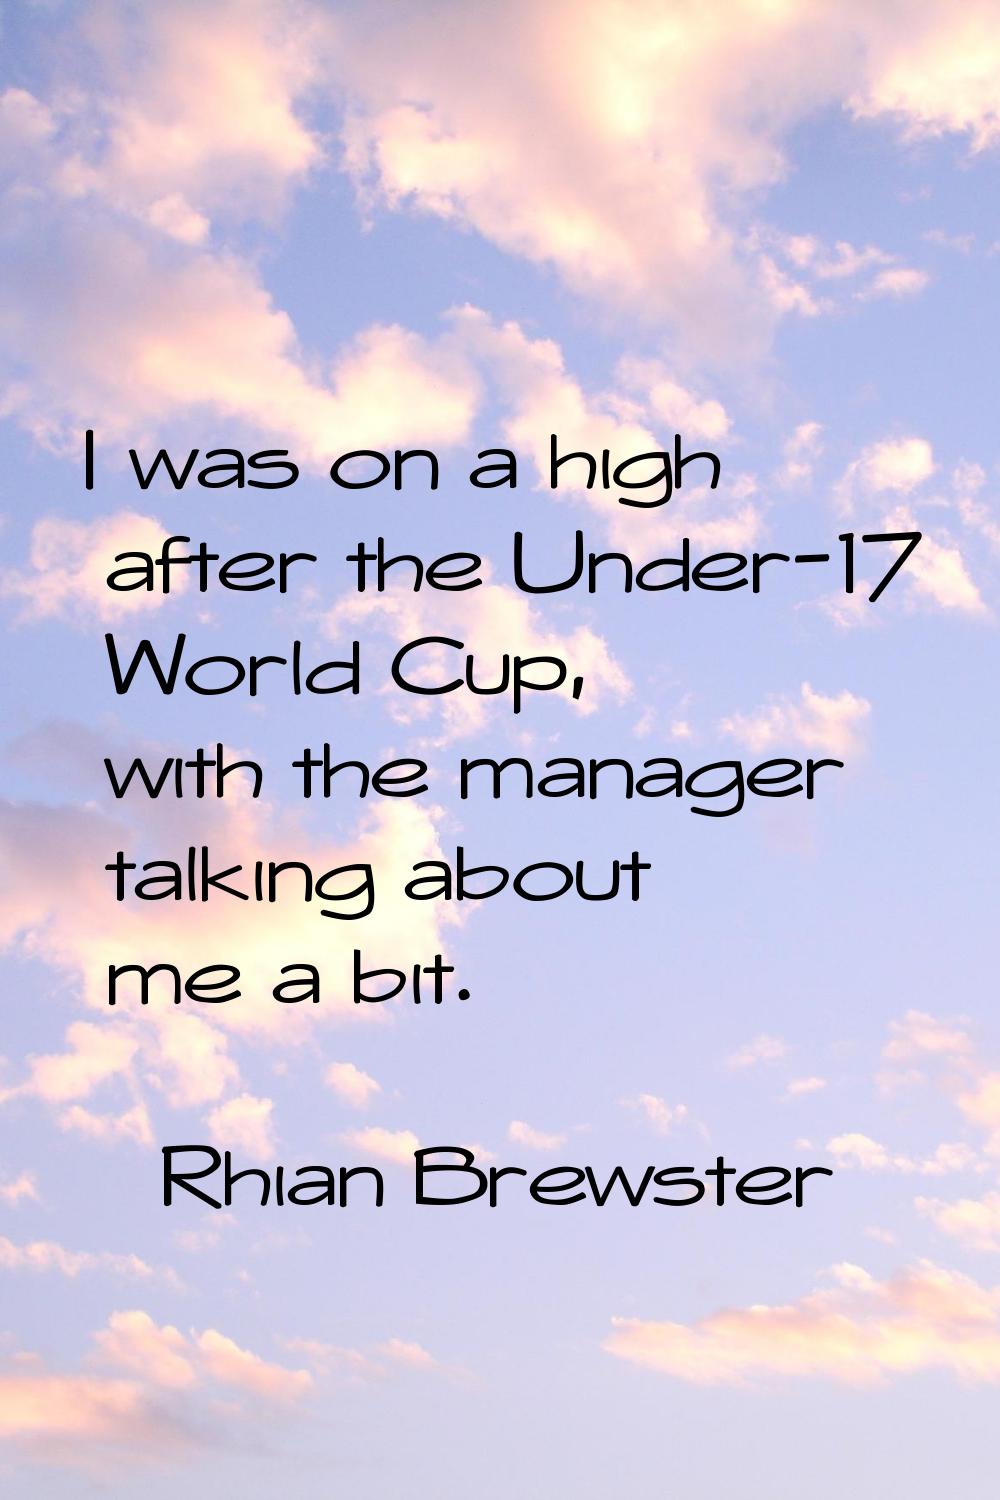 I was on a high after the Under-17 World Cup, with the manager talking about me a bit.